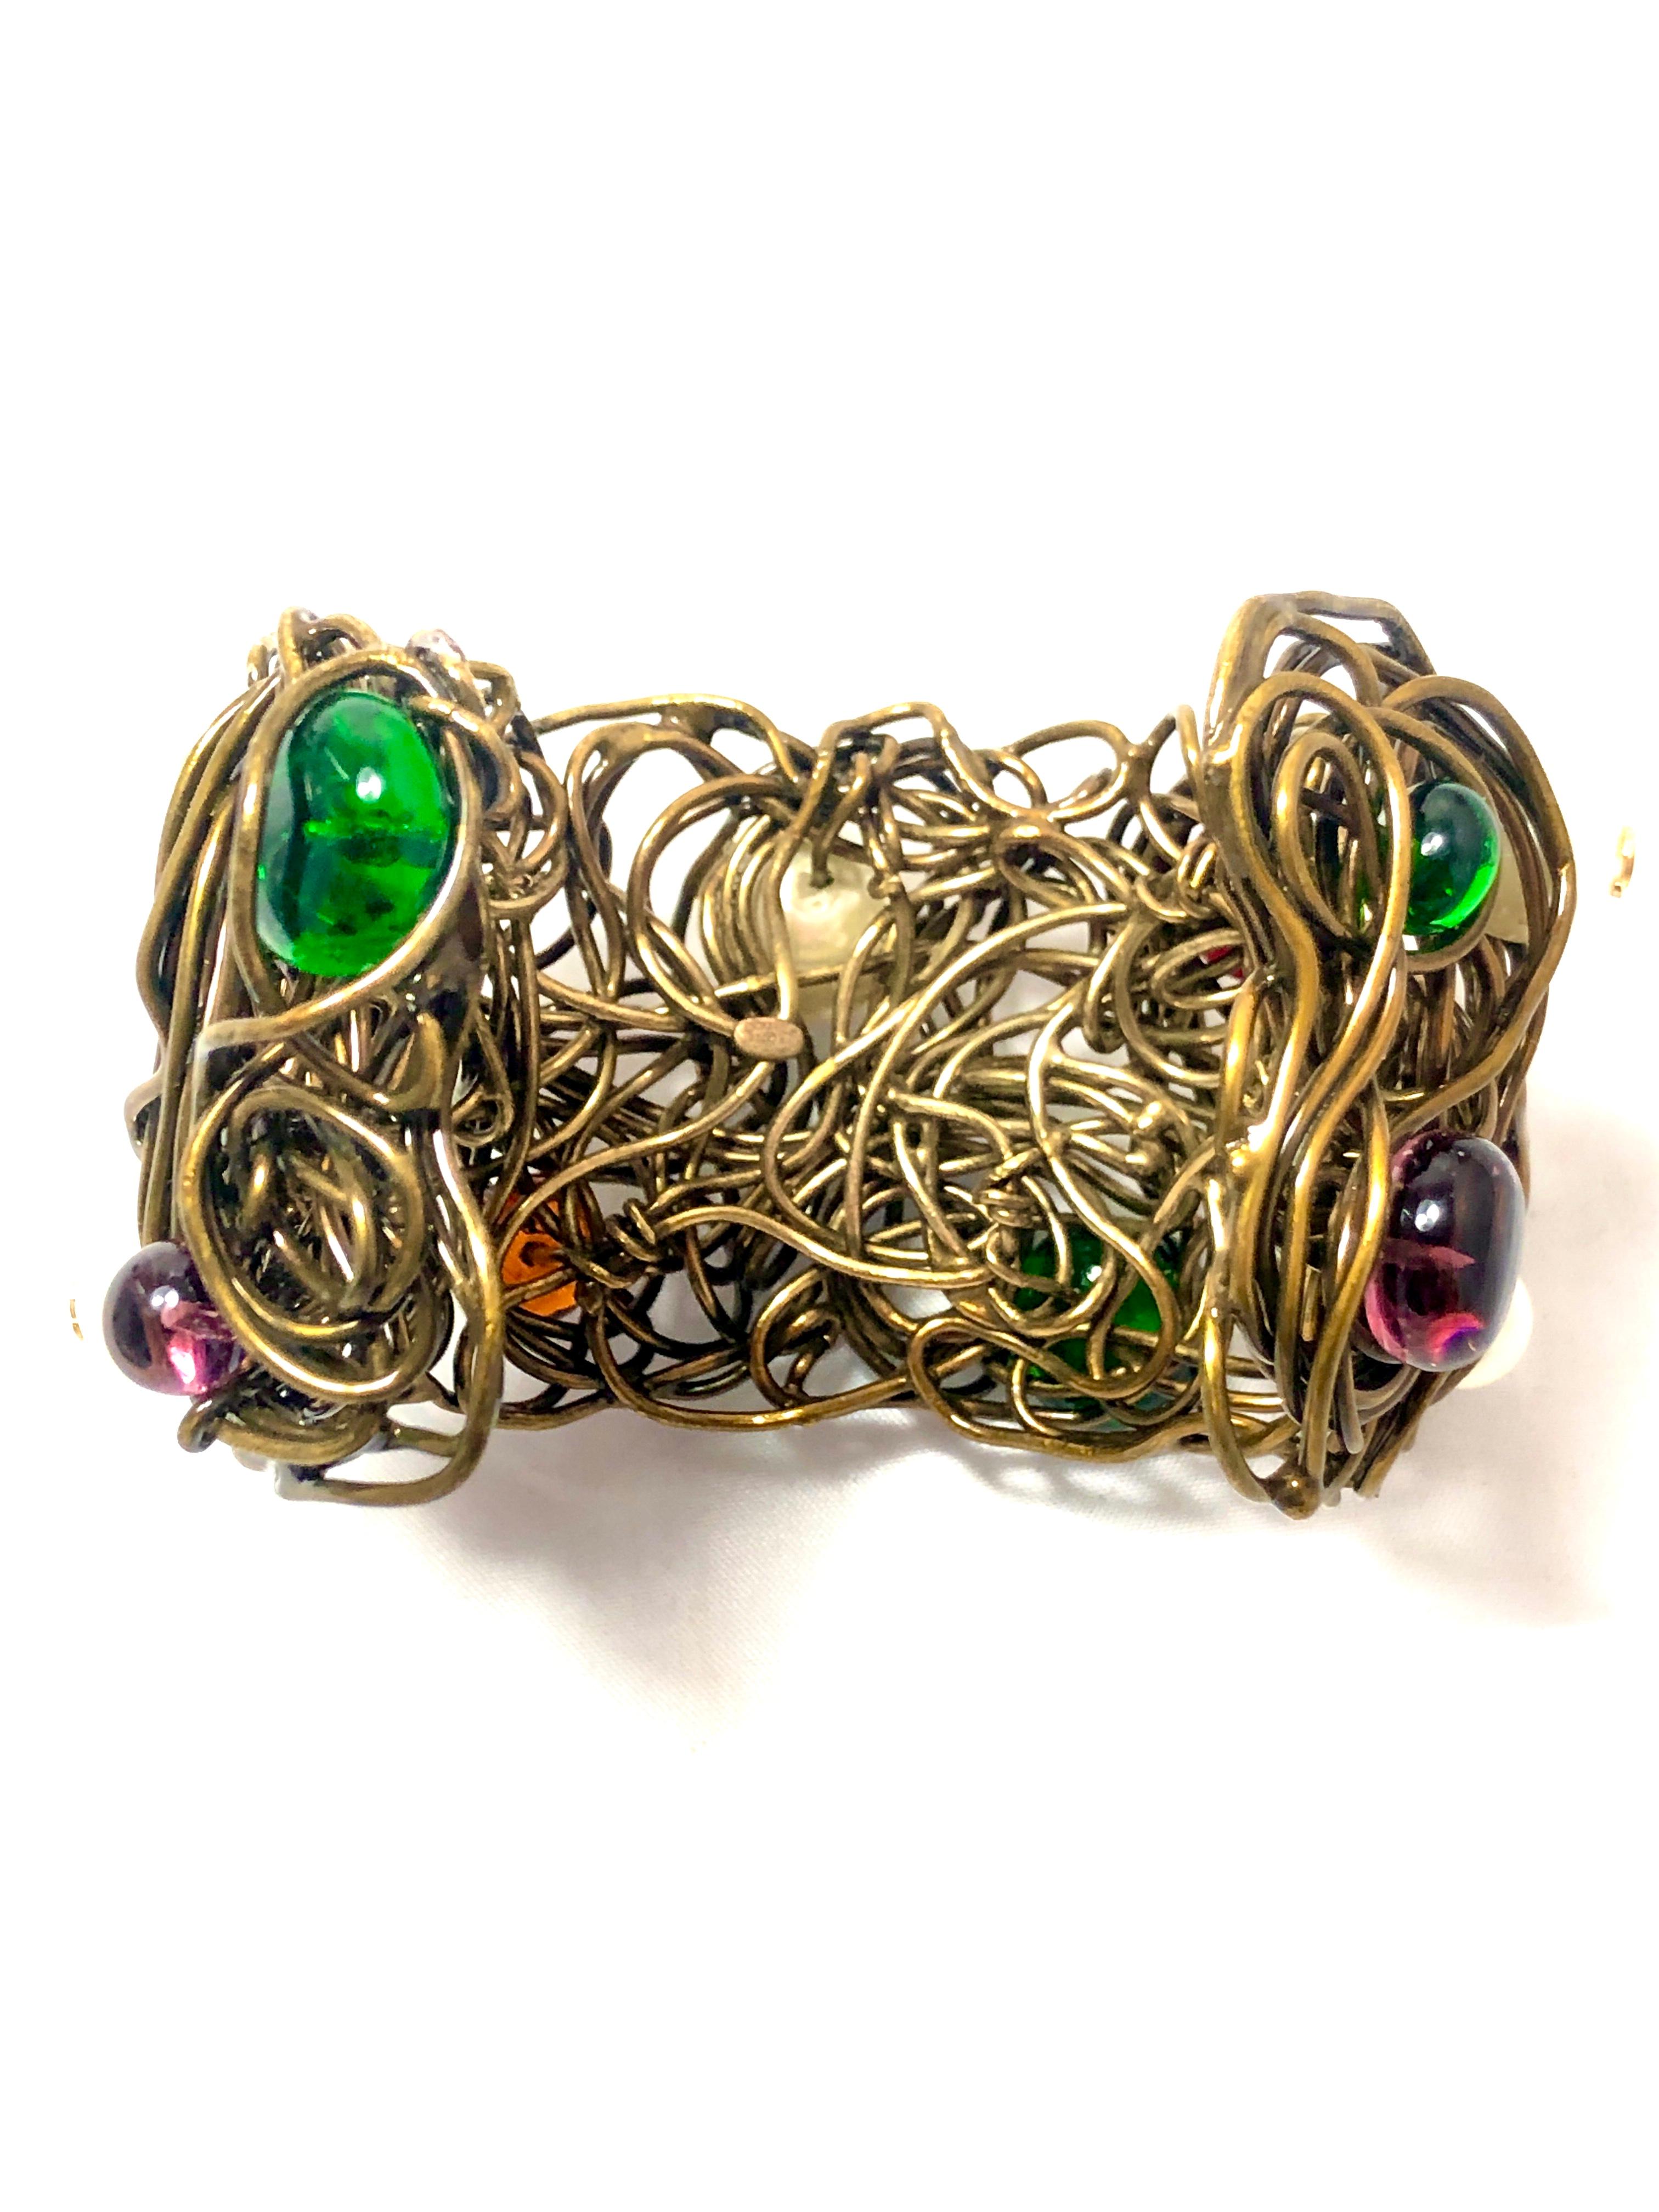 Highly sought after Chanel Bird’s nest Cuff Bracelet.  Adorned with Gripoix glass and pearl Accent.  Dated 1997. This magnificent bracelet is one for the books. Intricate and beautifully crafted, it makes a statement on any wrist. It measures 2